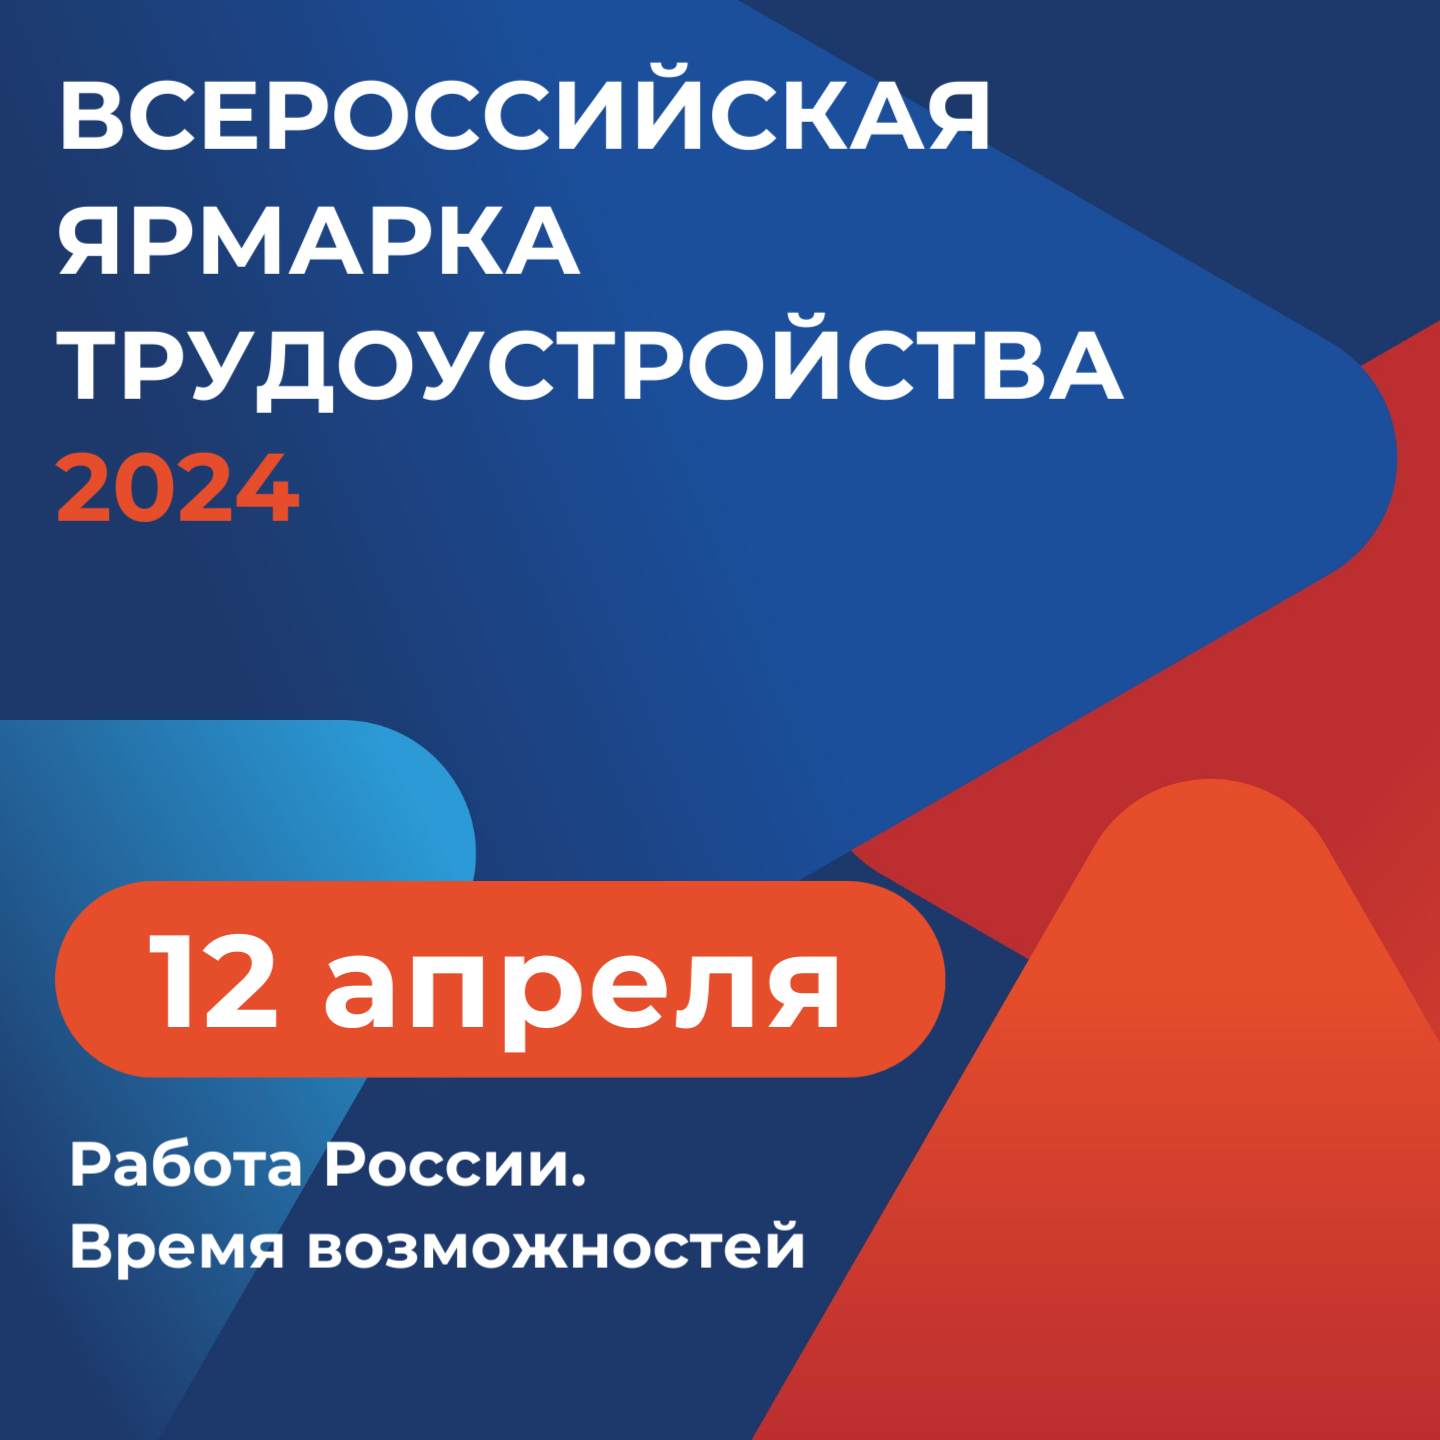 On April 12, the first stage of the All-Russian employment fair "Jobs of Russia. A time of Opportunity"